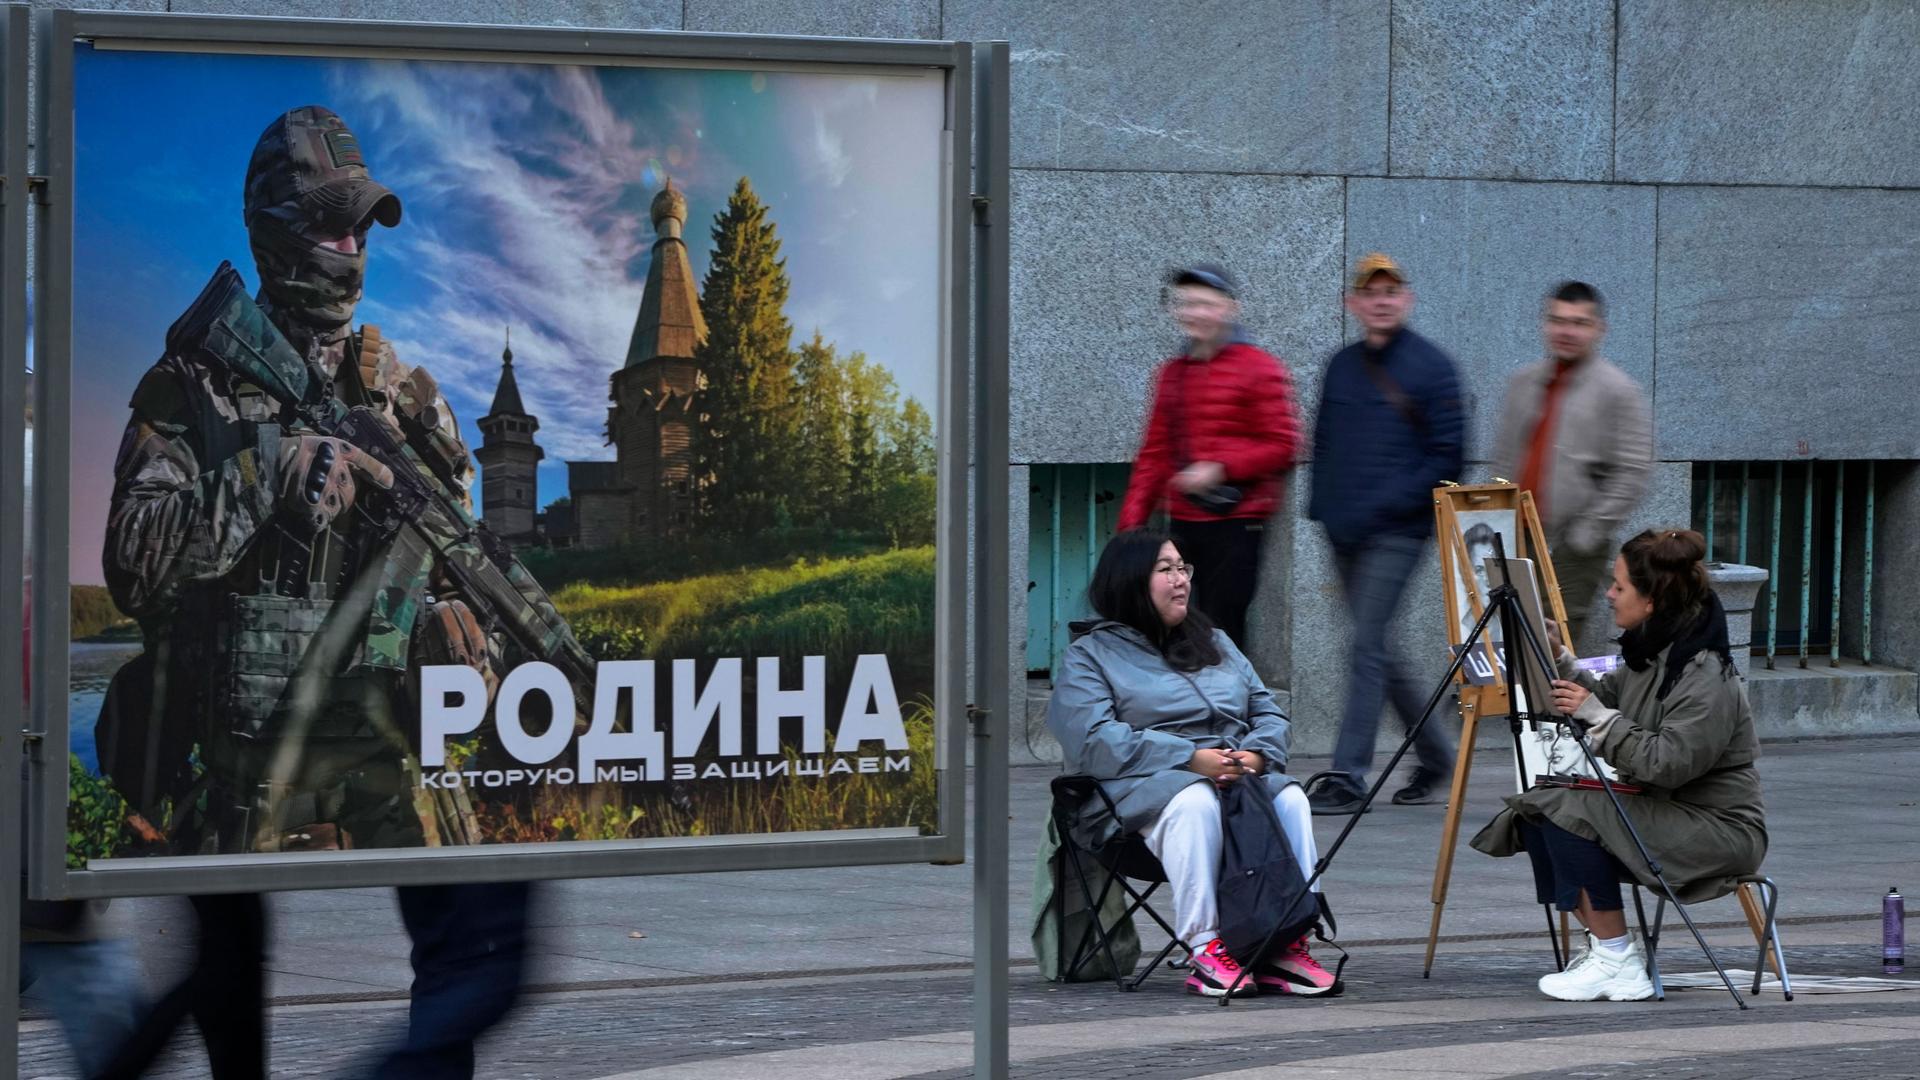 A street artist paints a portrait of a woman next to an image of a Russian serviceman and words, "The Motherland we defend," at a street exhibition of military photos, in central St. Petersburg, Russia, Friday, Oct. 6, 2023.